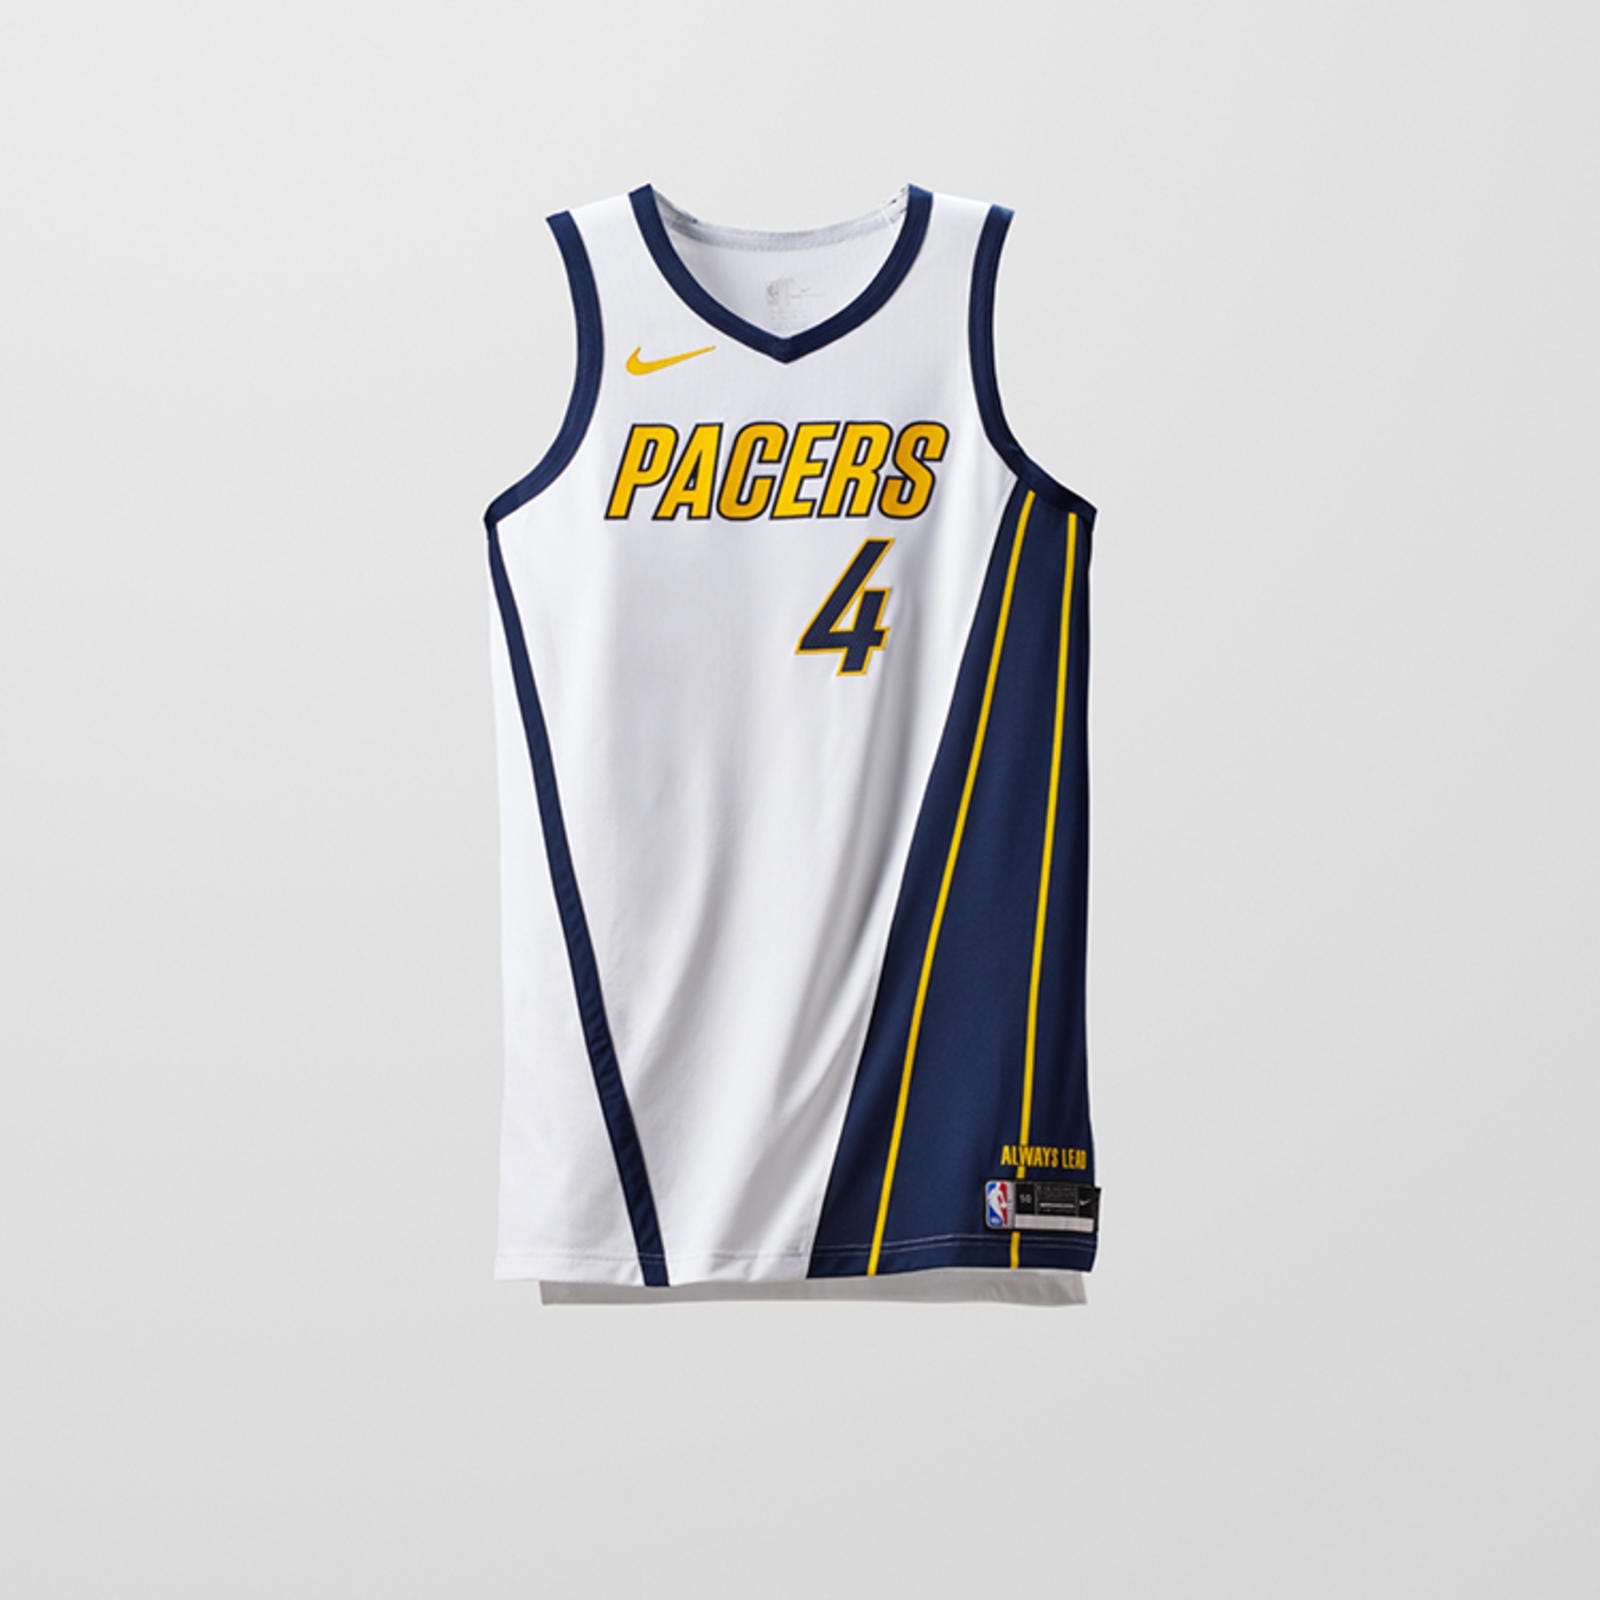 pacers new uniforms